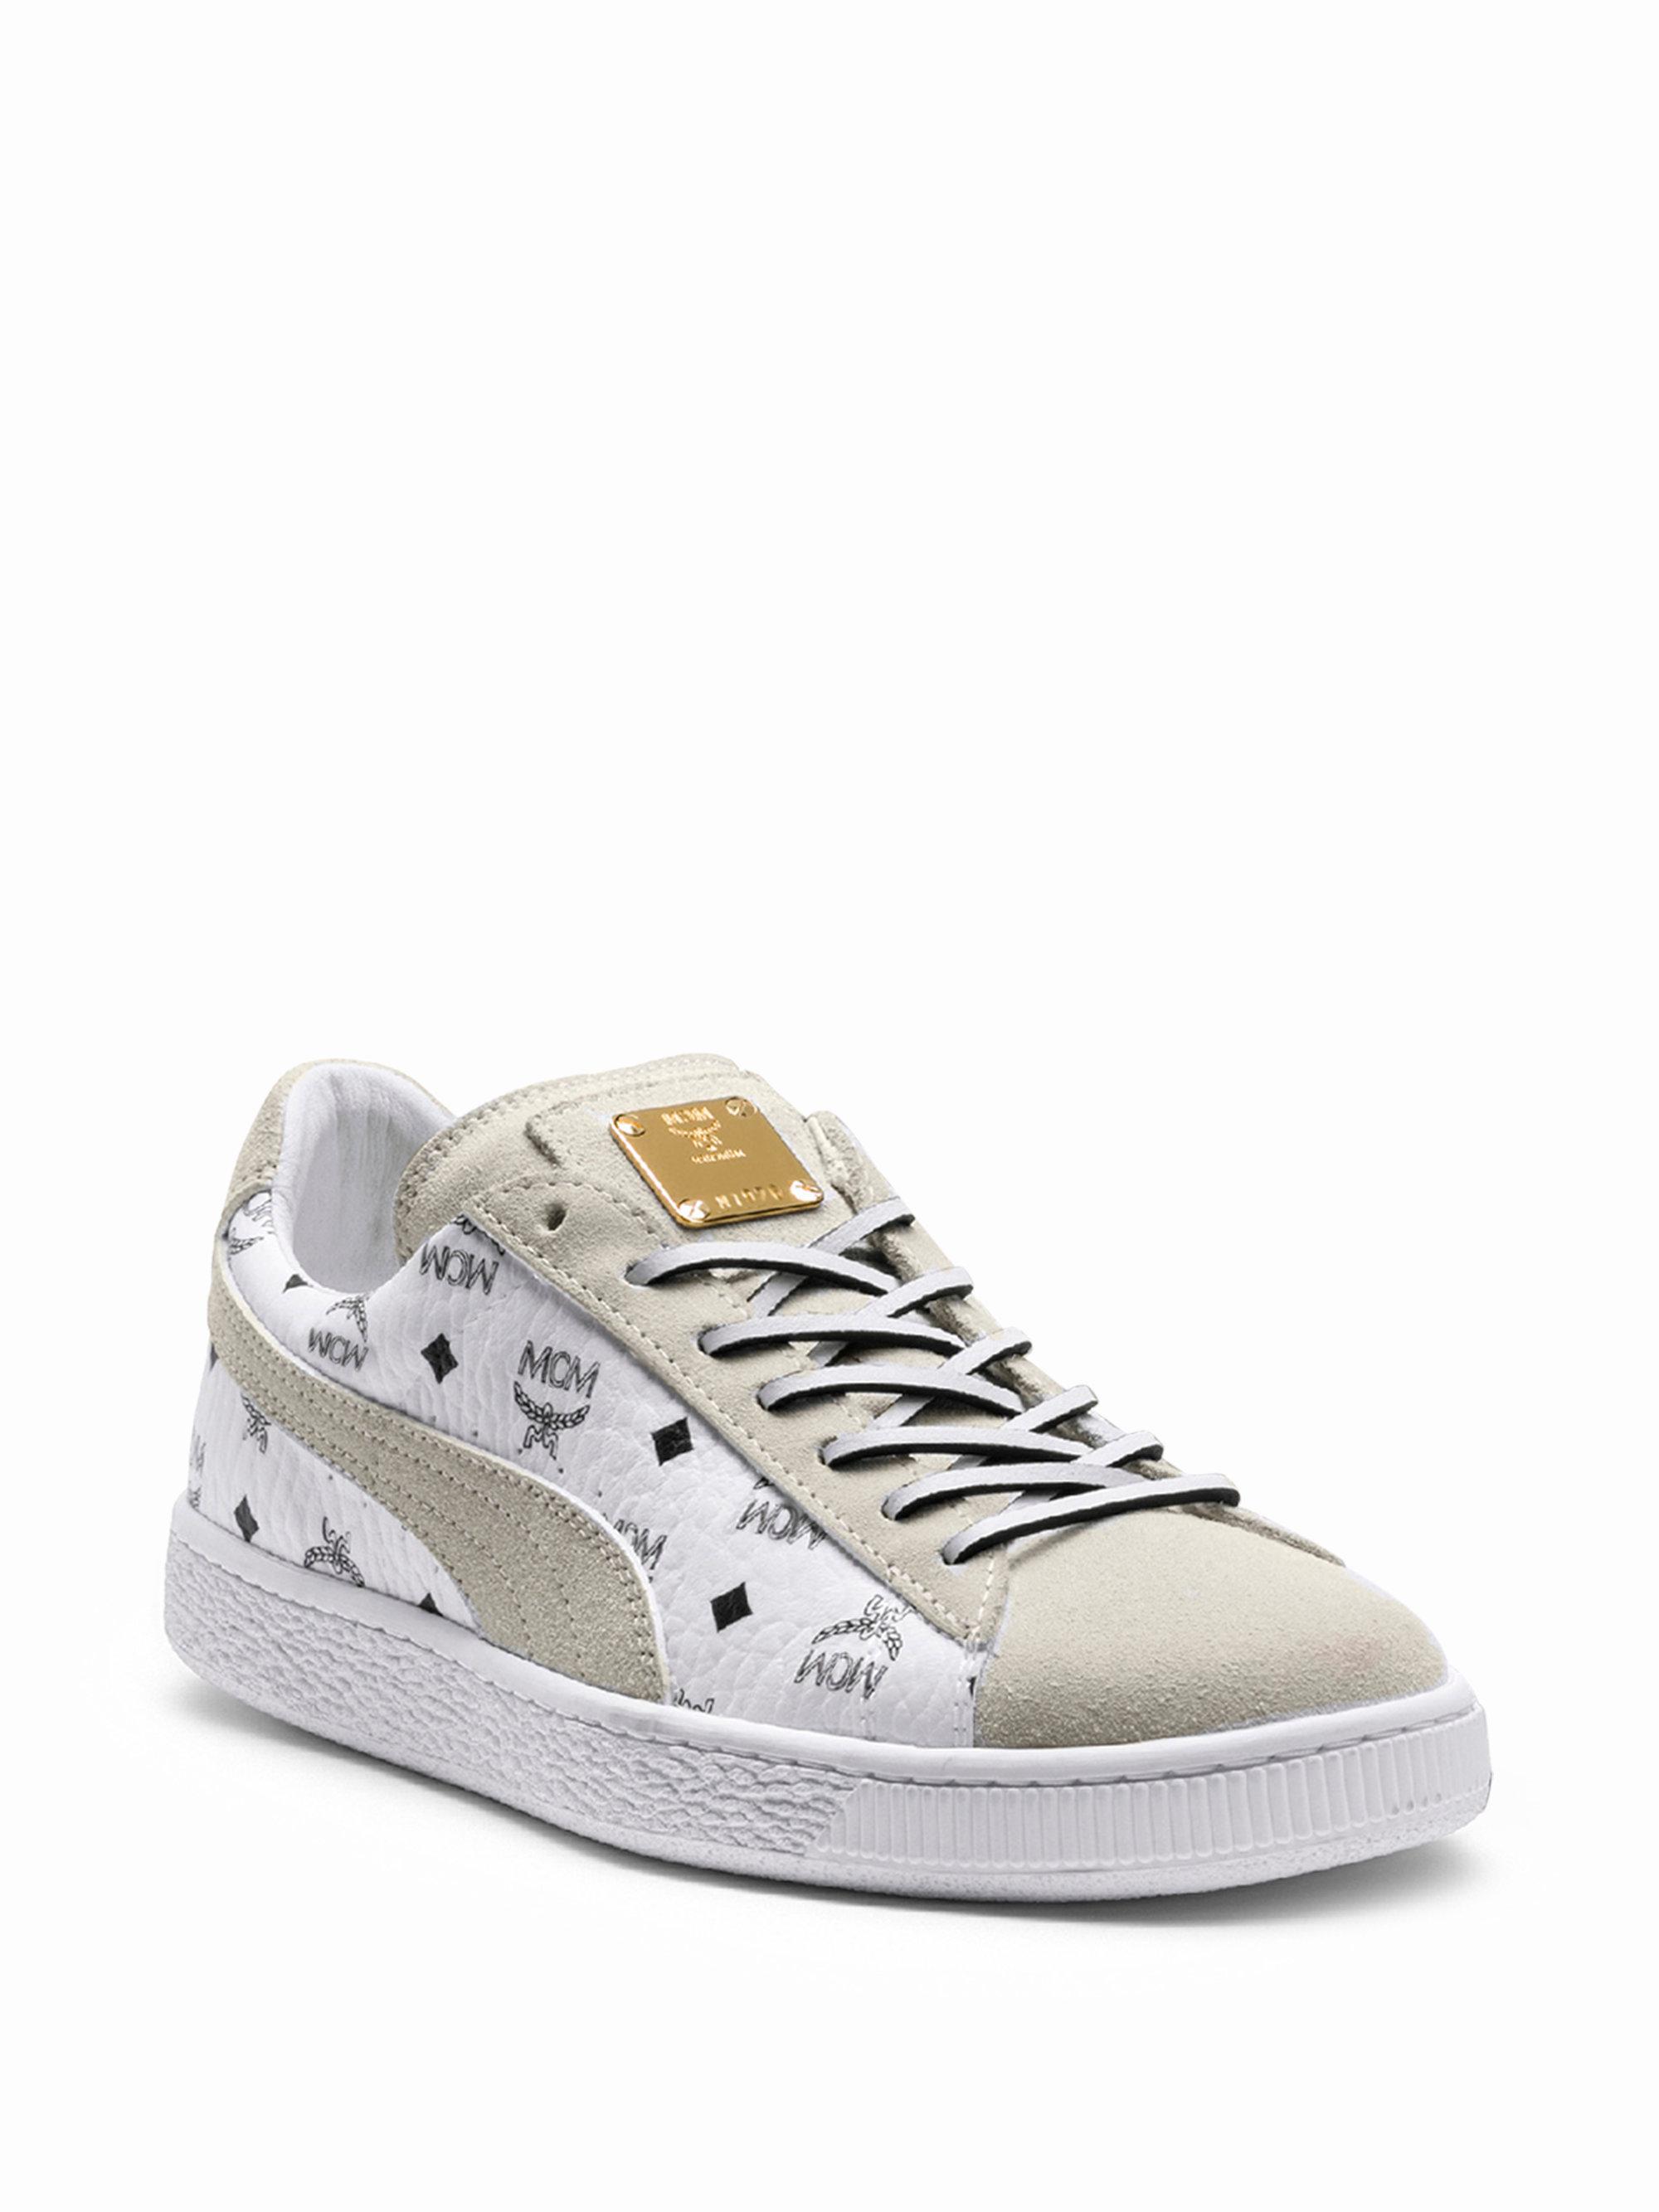 PUMA X Mcm Suede Classic Sneakers in White for Men - Lyst